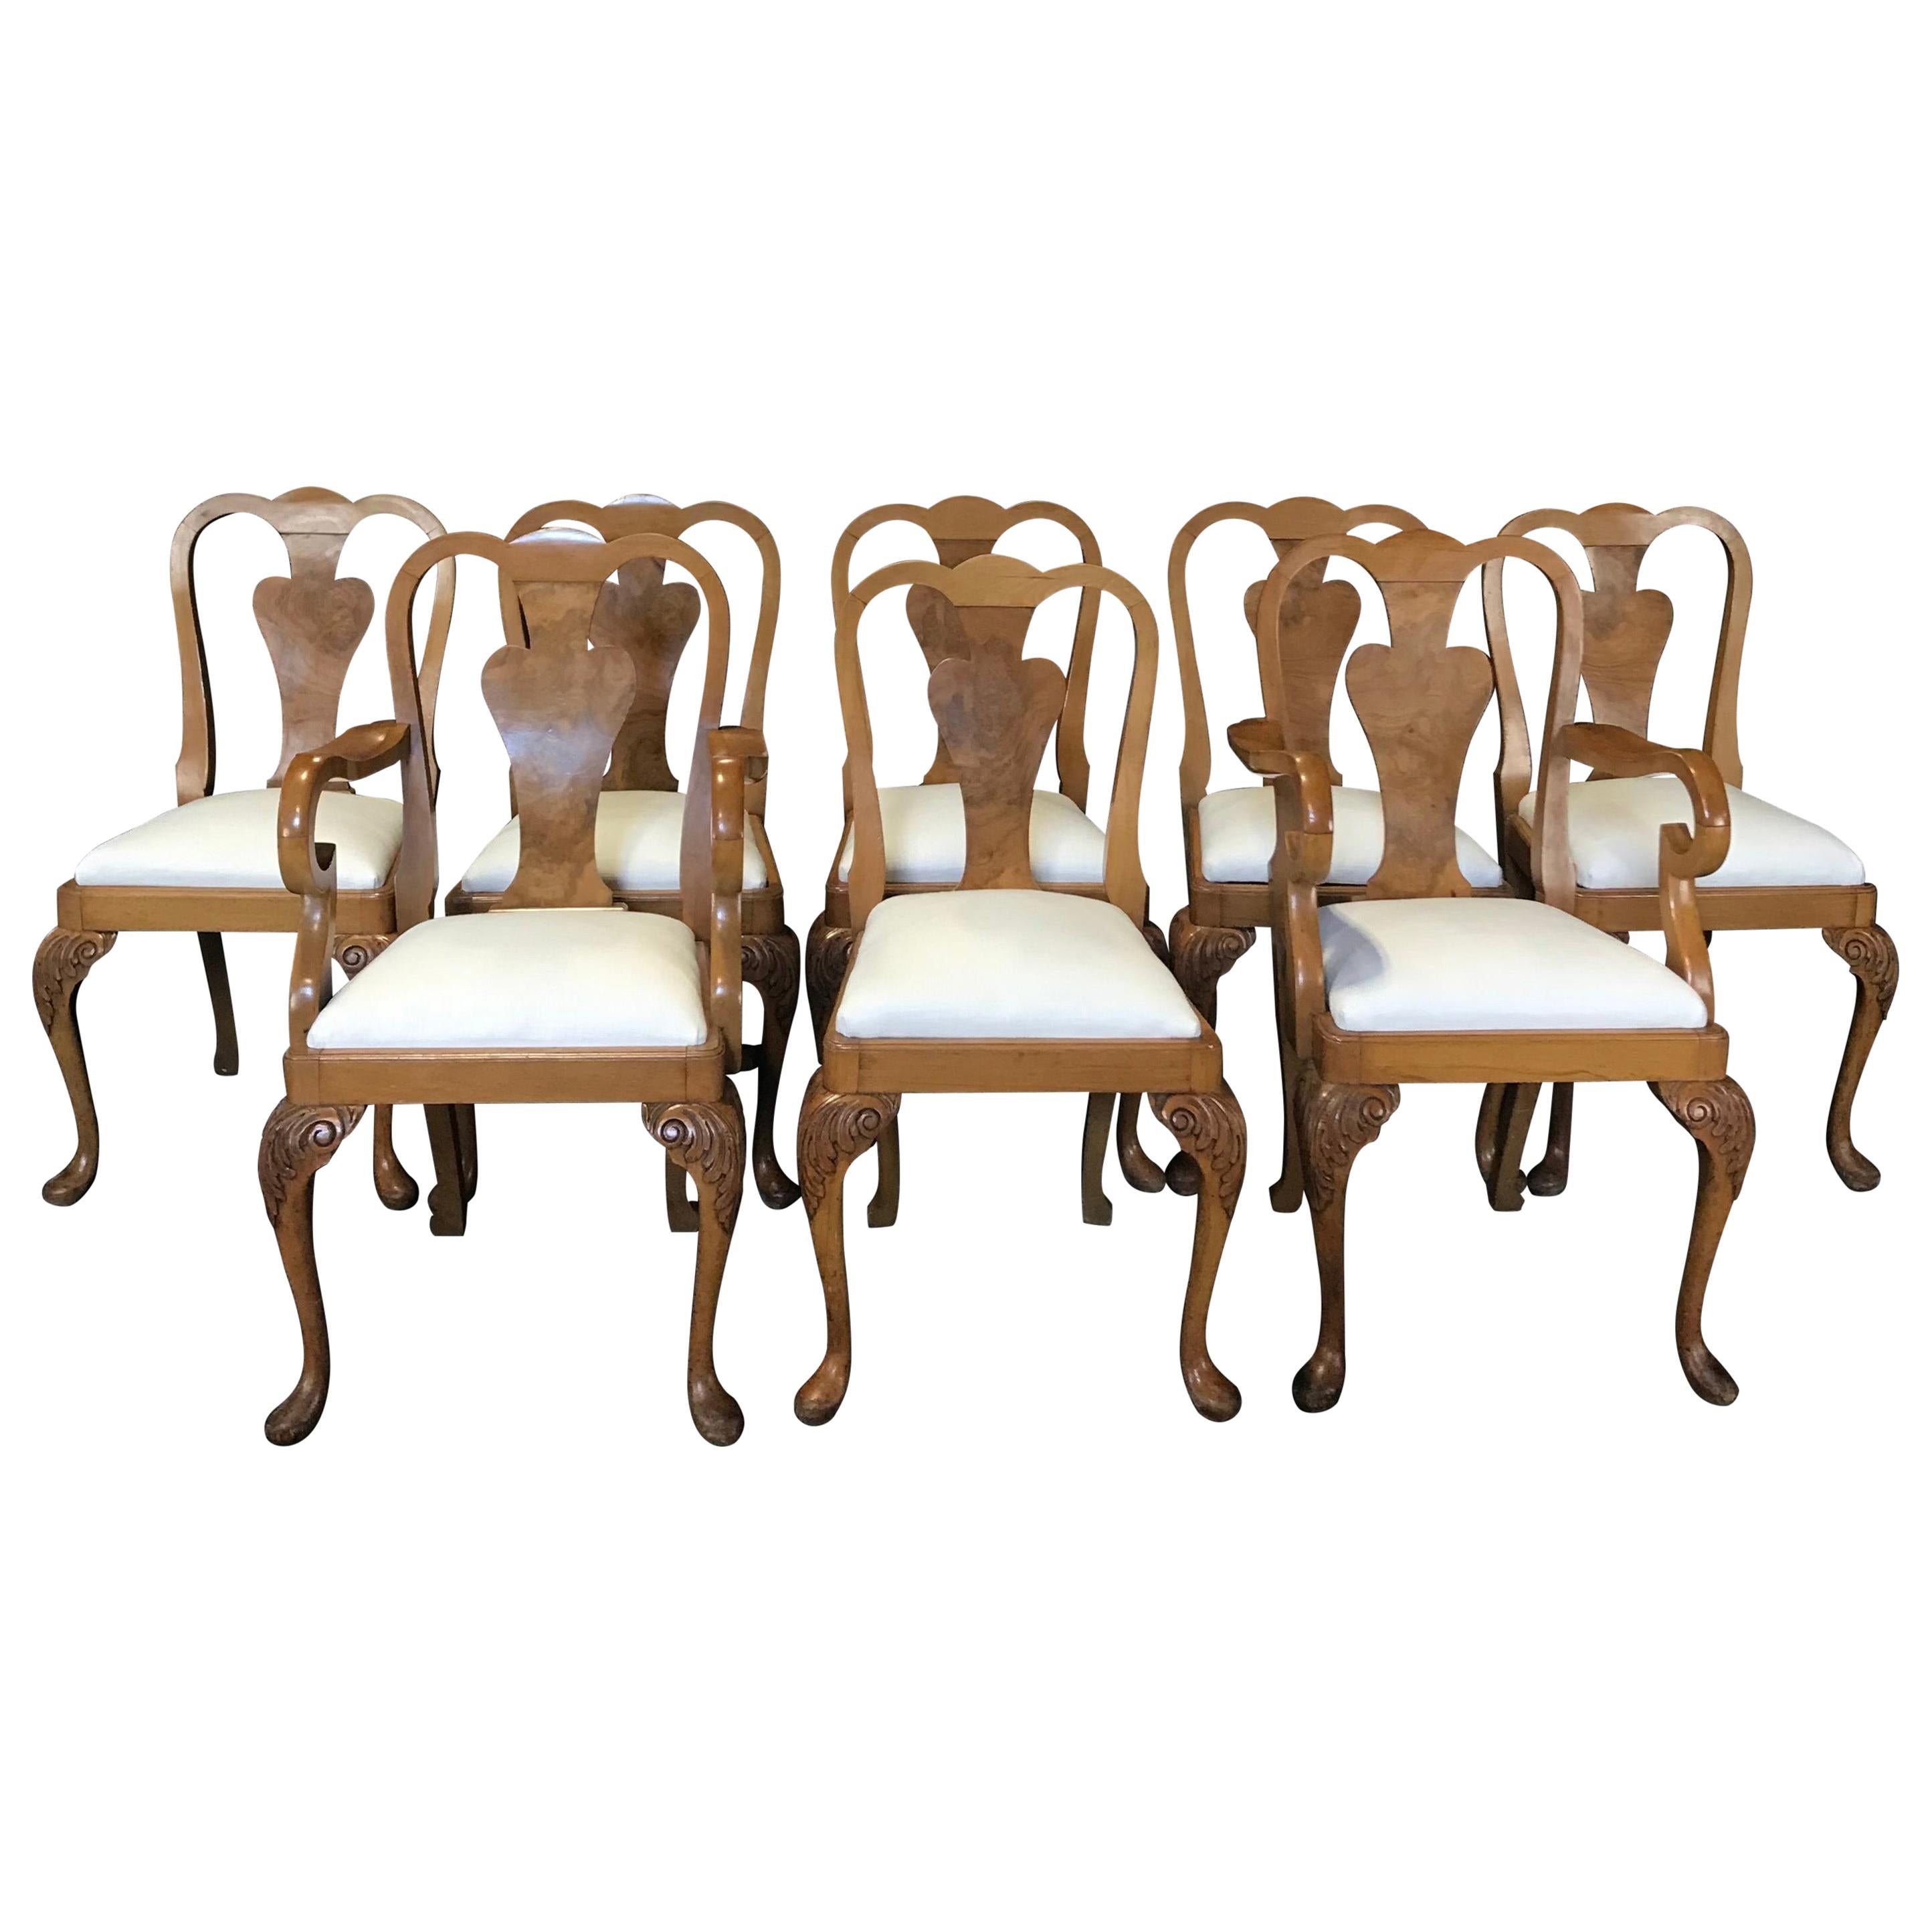 Set of 8 French Burled Walnut and Claw Foot Dining Chairs